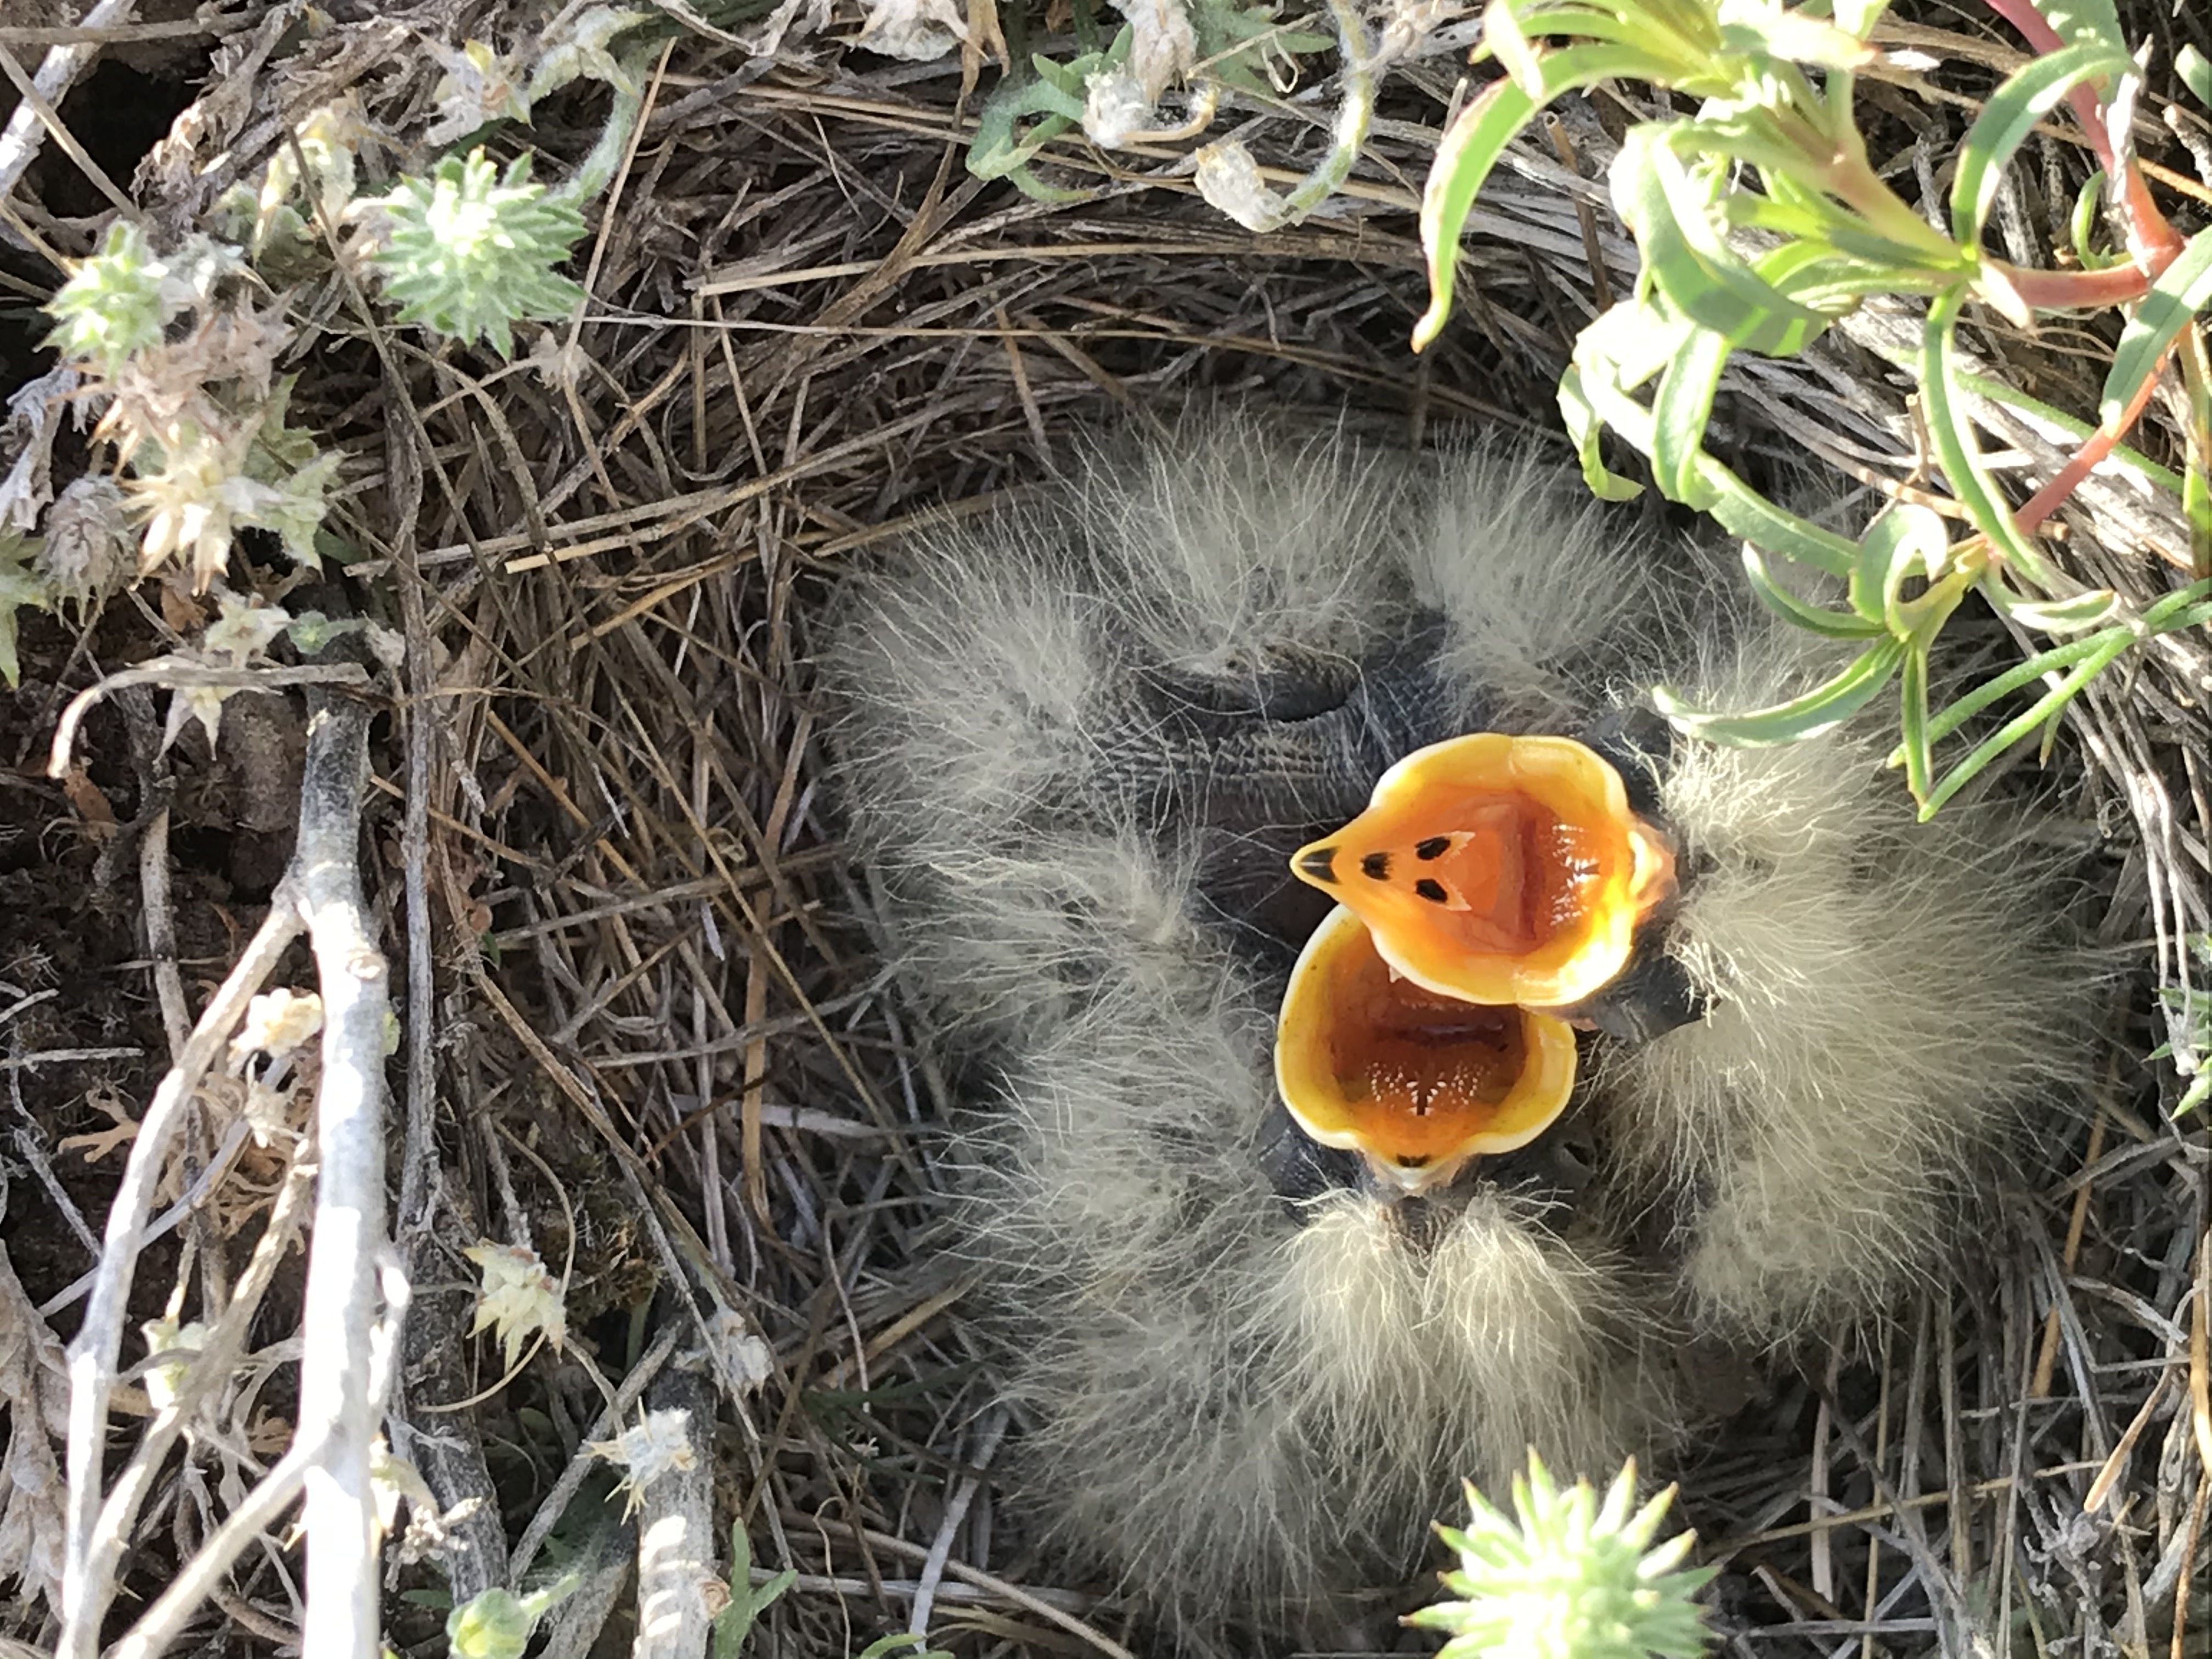 yellow downy horned lark chicks look at the camera with mouths open